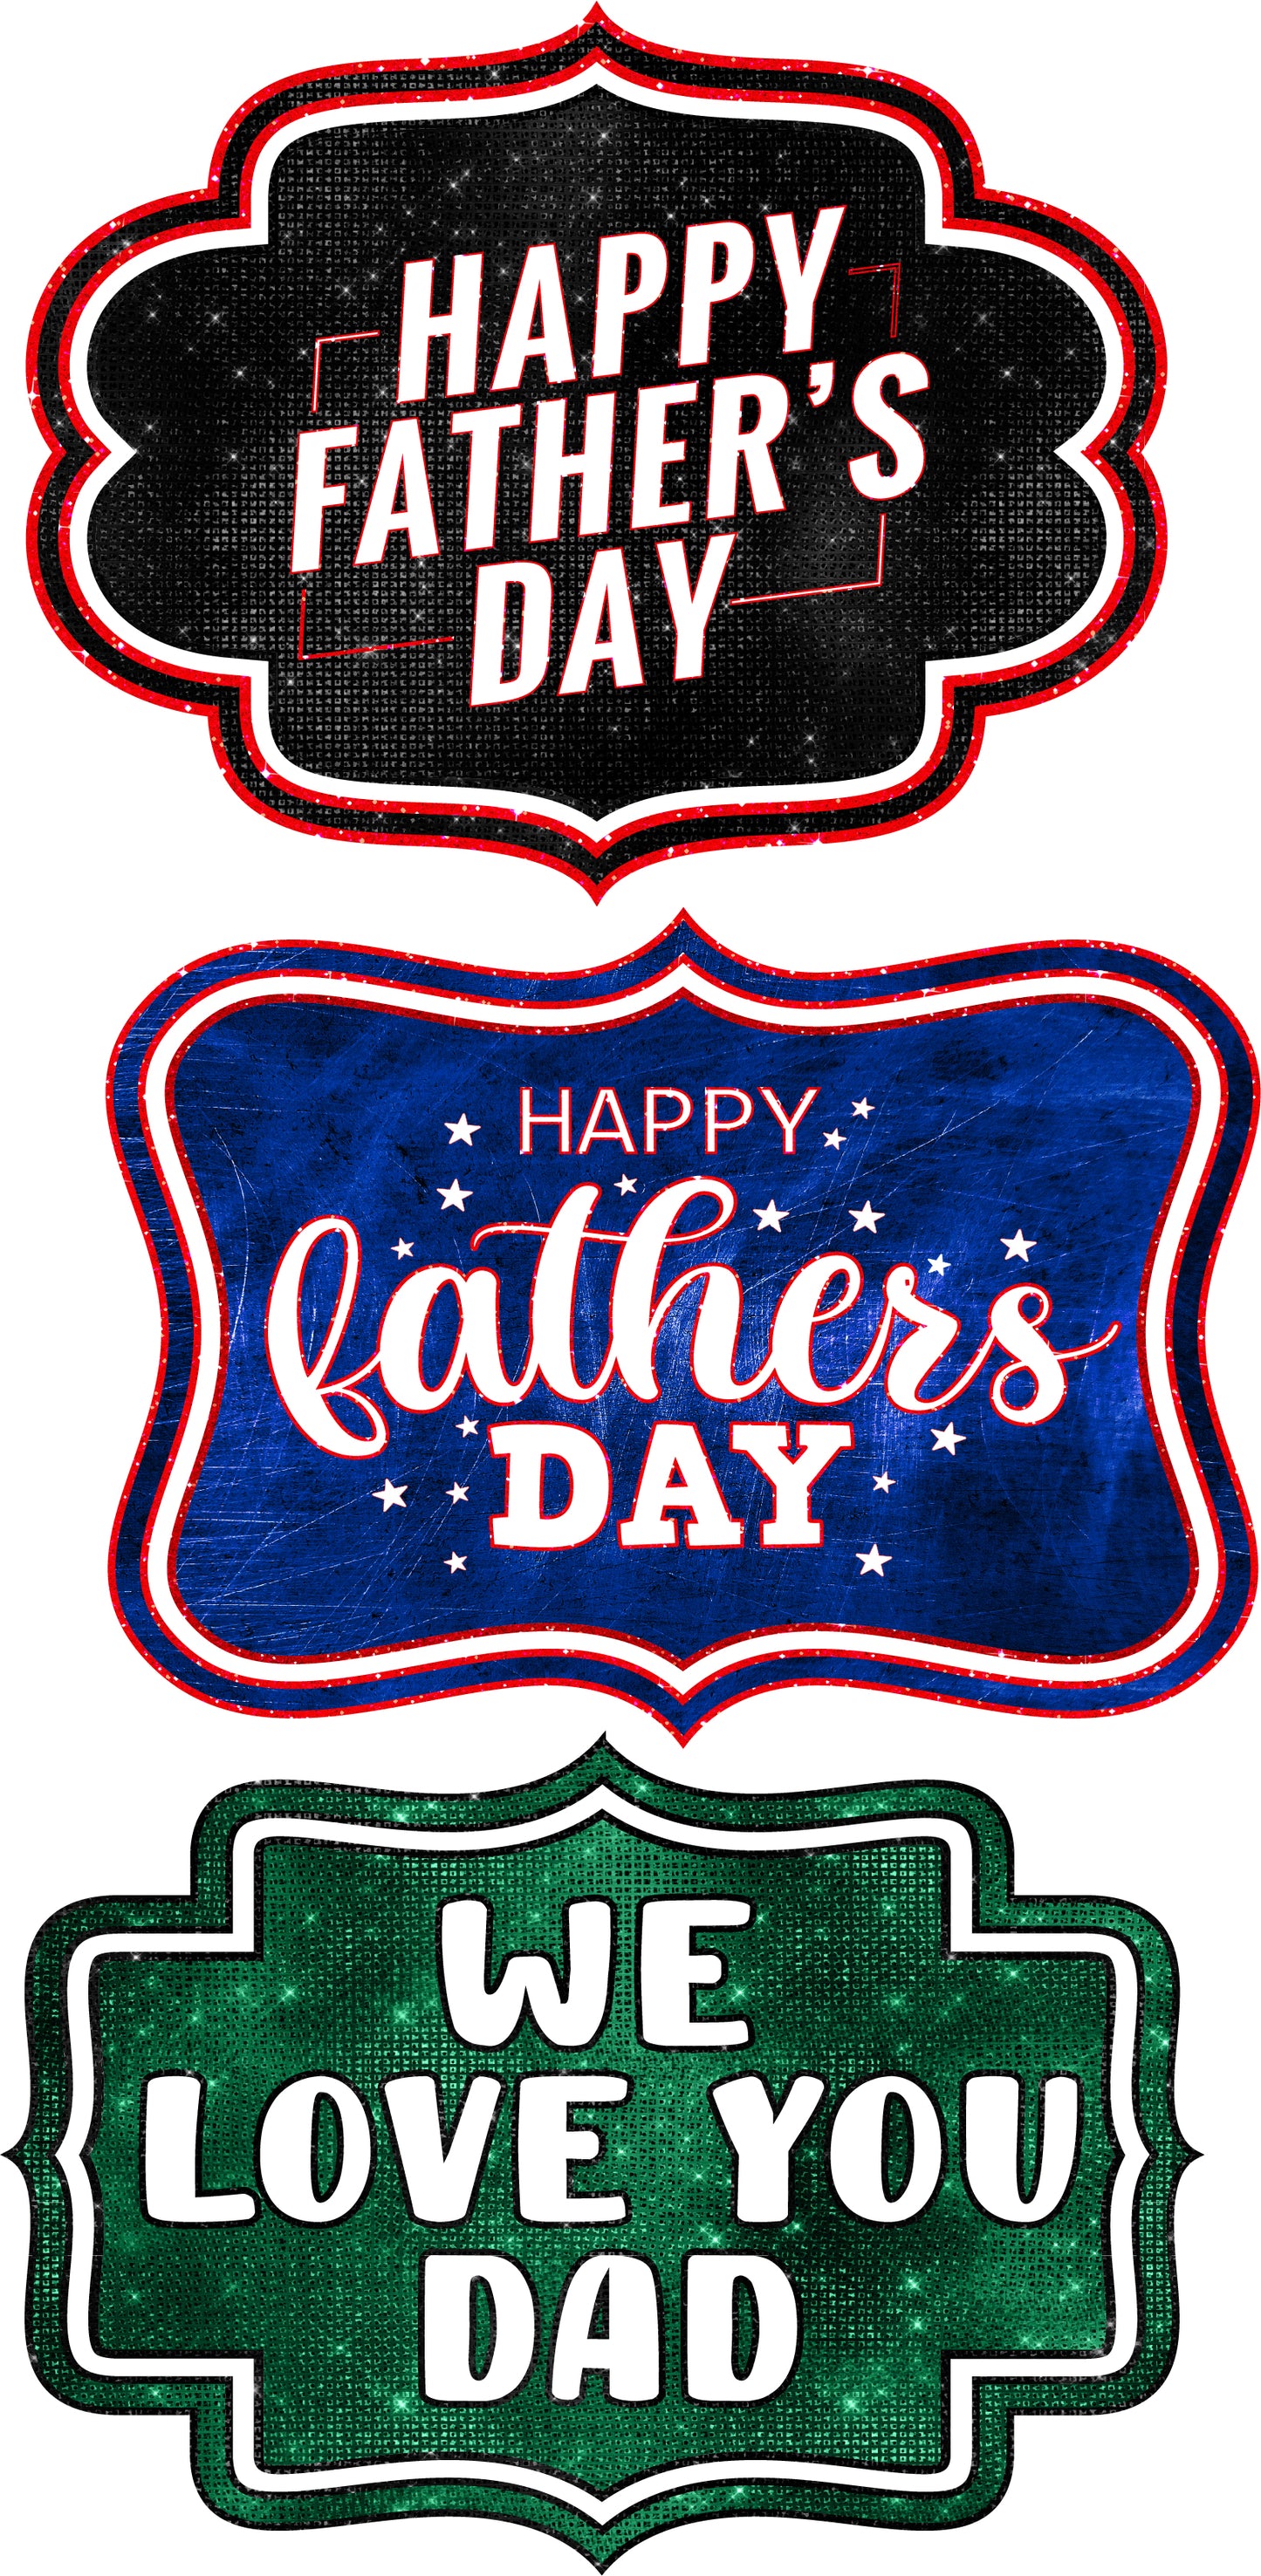 Happy Father's Day - Set 3